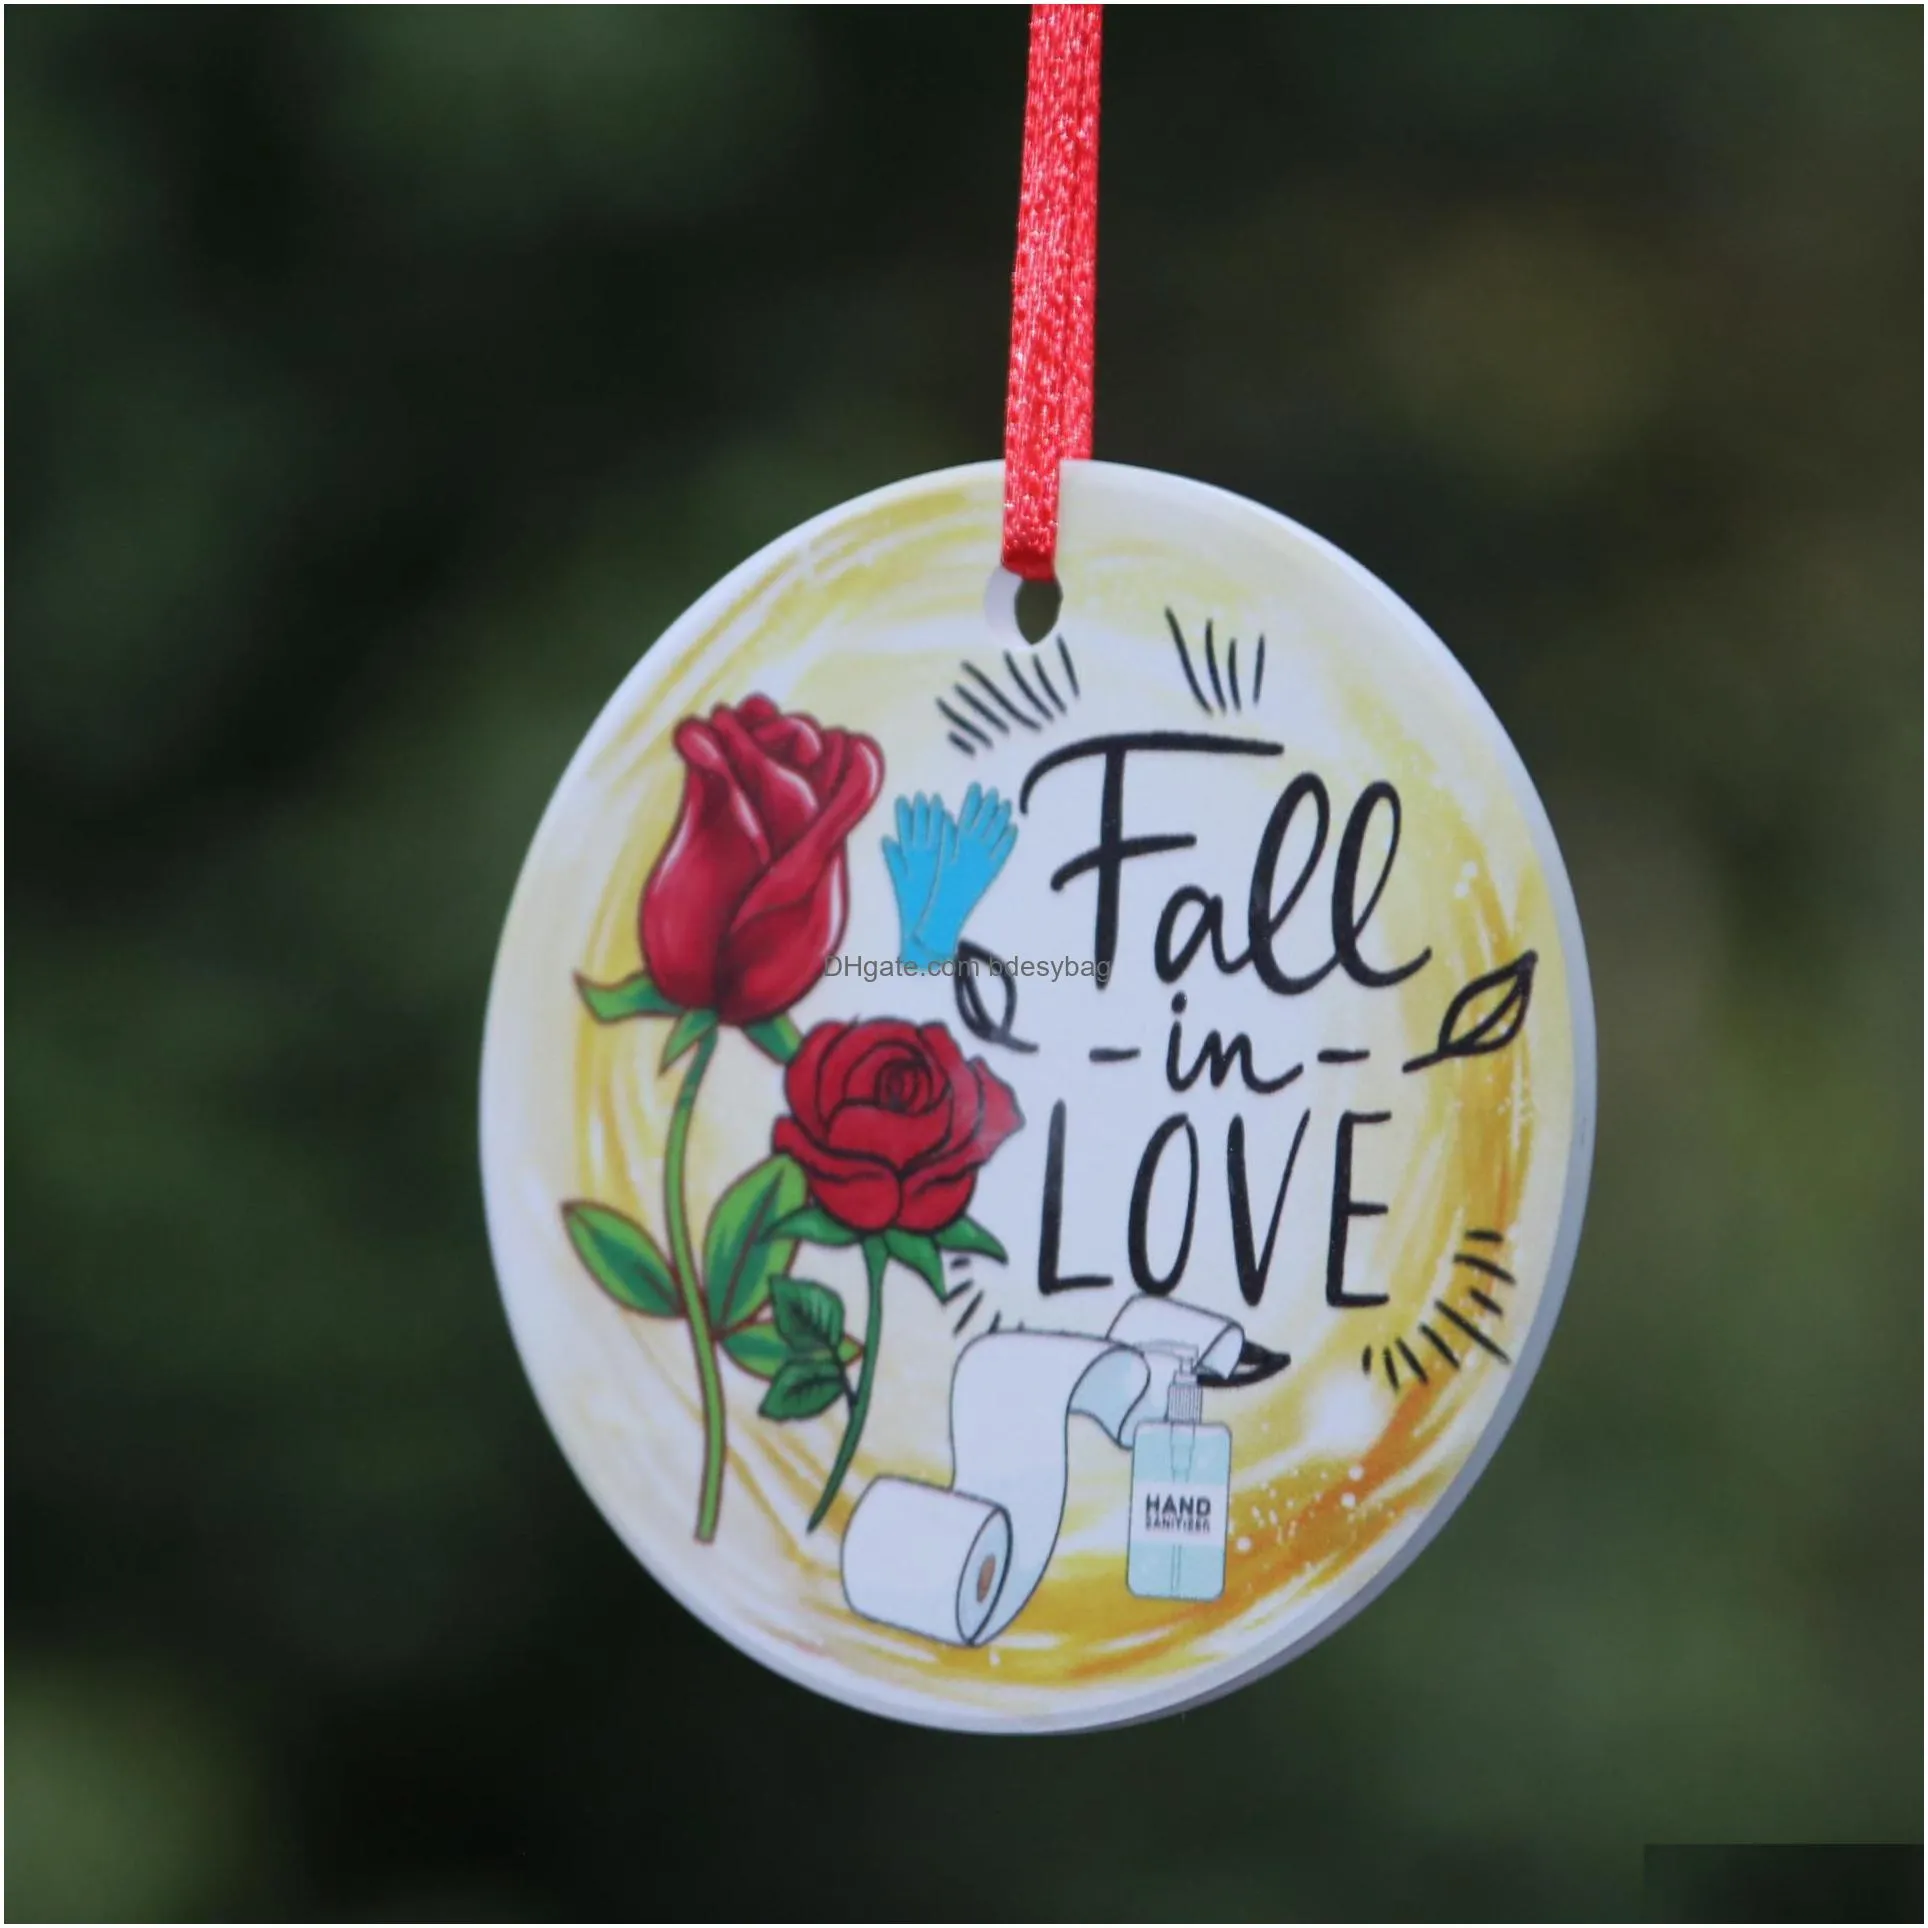 Party Favor Valentines Day Pendant Ornaments Party Gifts Round Heart-Shaped Ceramic Ornament Diy Gift Fall In Love Hanging Pendants Dr Dhhfp